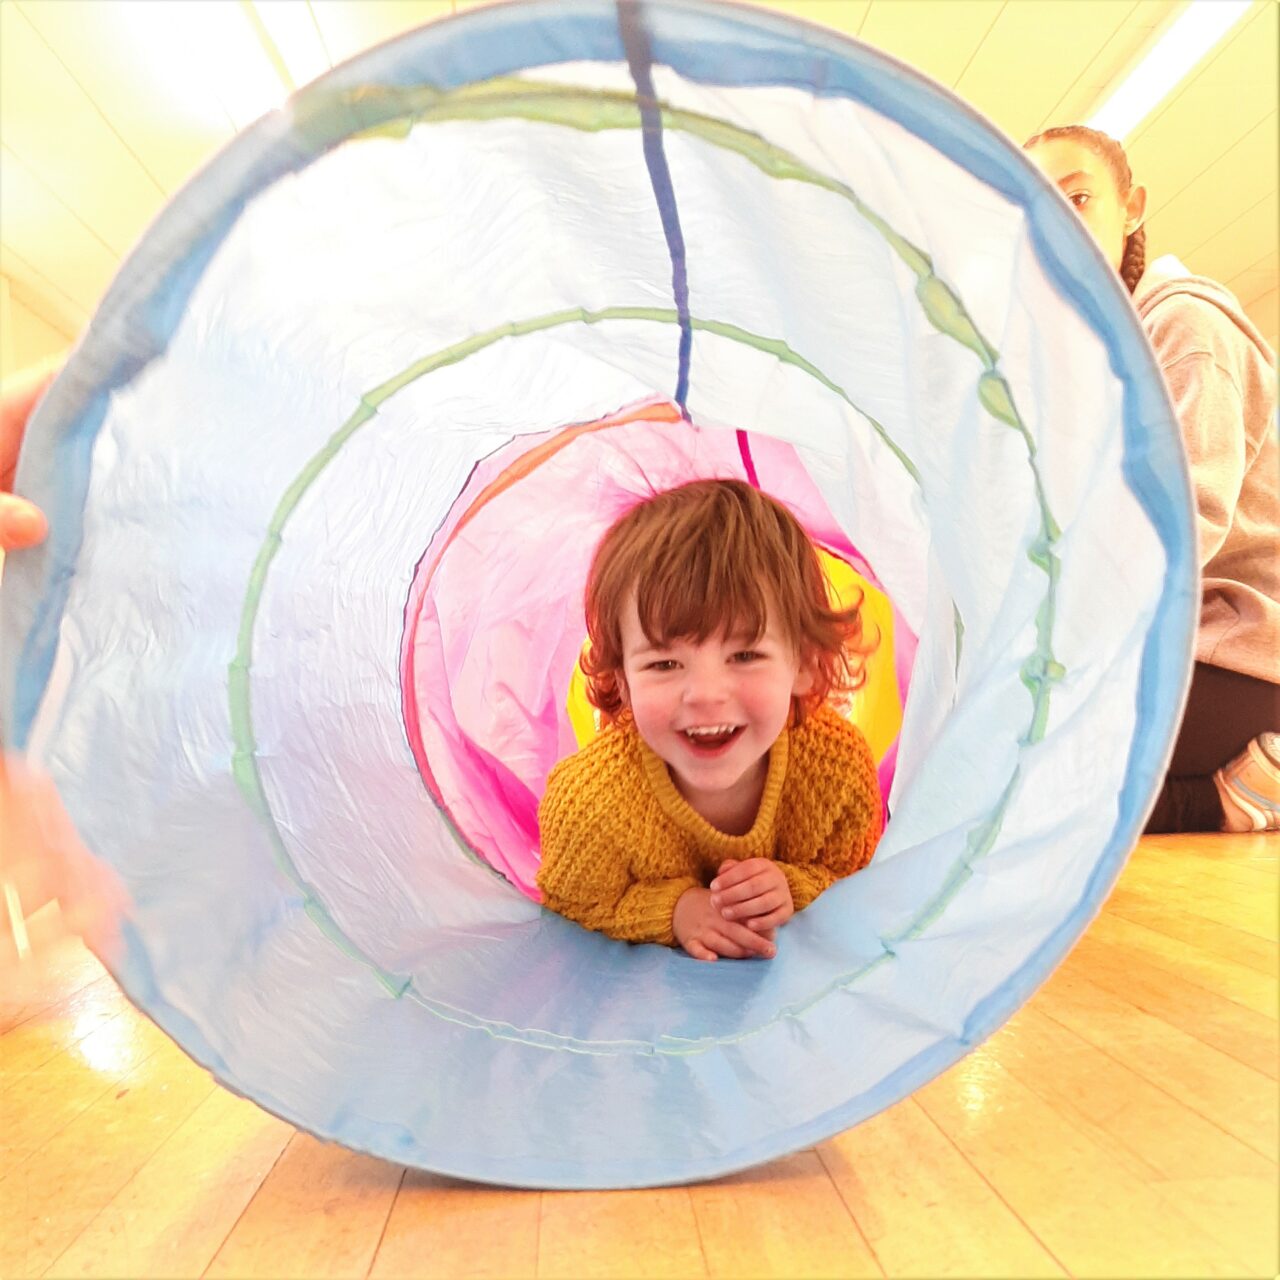 Young boy in yellow jumper smiles as he crawls through a colourful play tunnel